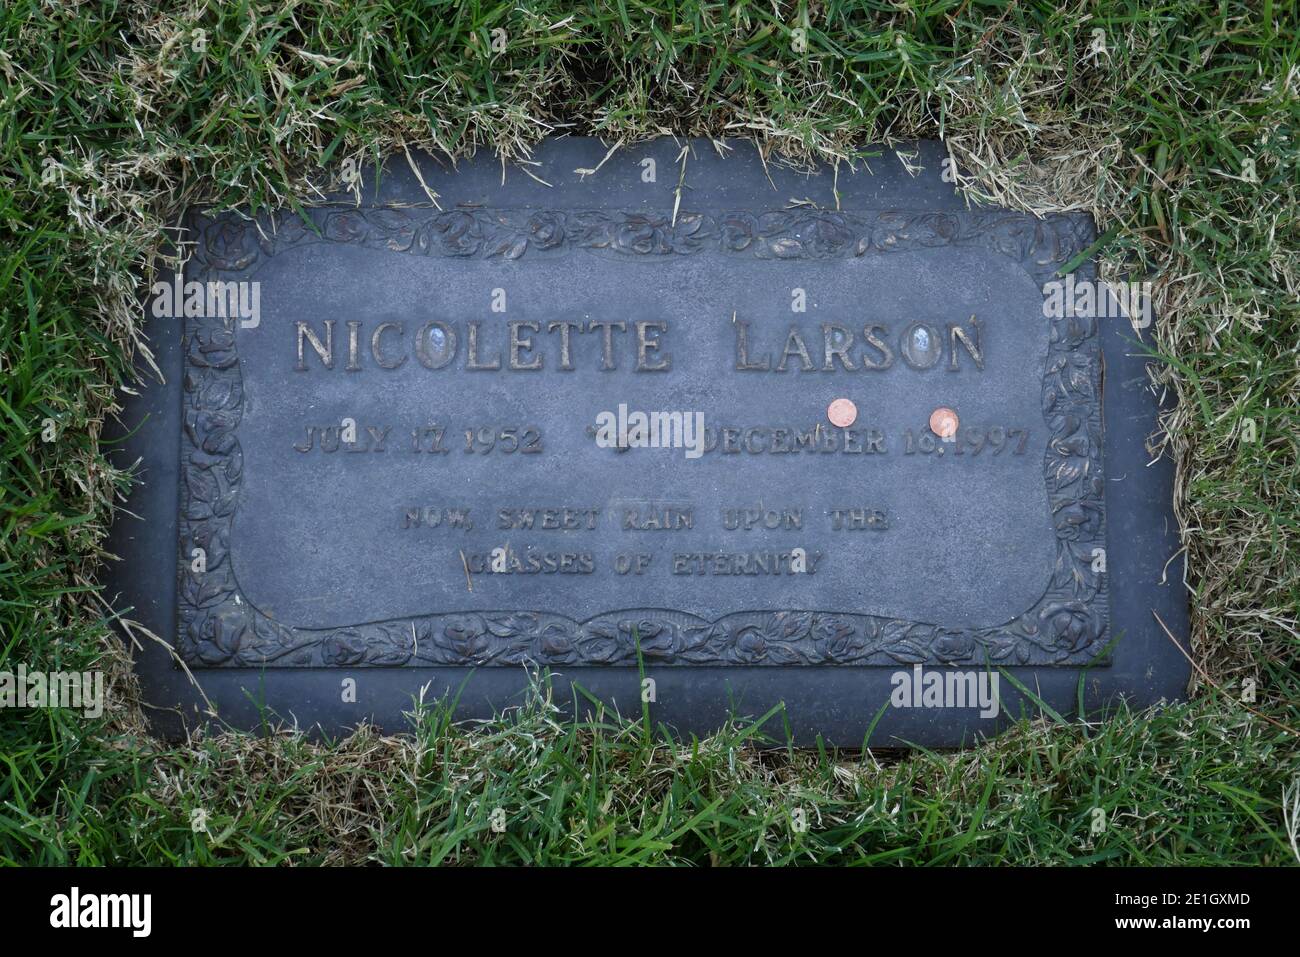 Los Angeles, California, USA 29th December 2020 A general view of atmosphere of singer Nicolette Larson's Grave at Forest Lawn Hollywood Hills Memorial Park on December 29, 2020 in Los Angeles, California, USA. Photo by Barry King/Alamy Stock Photo Stock Photo